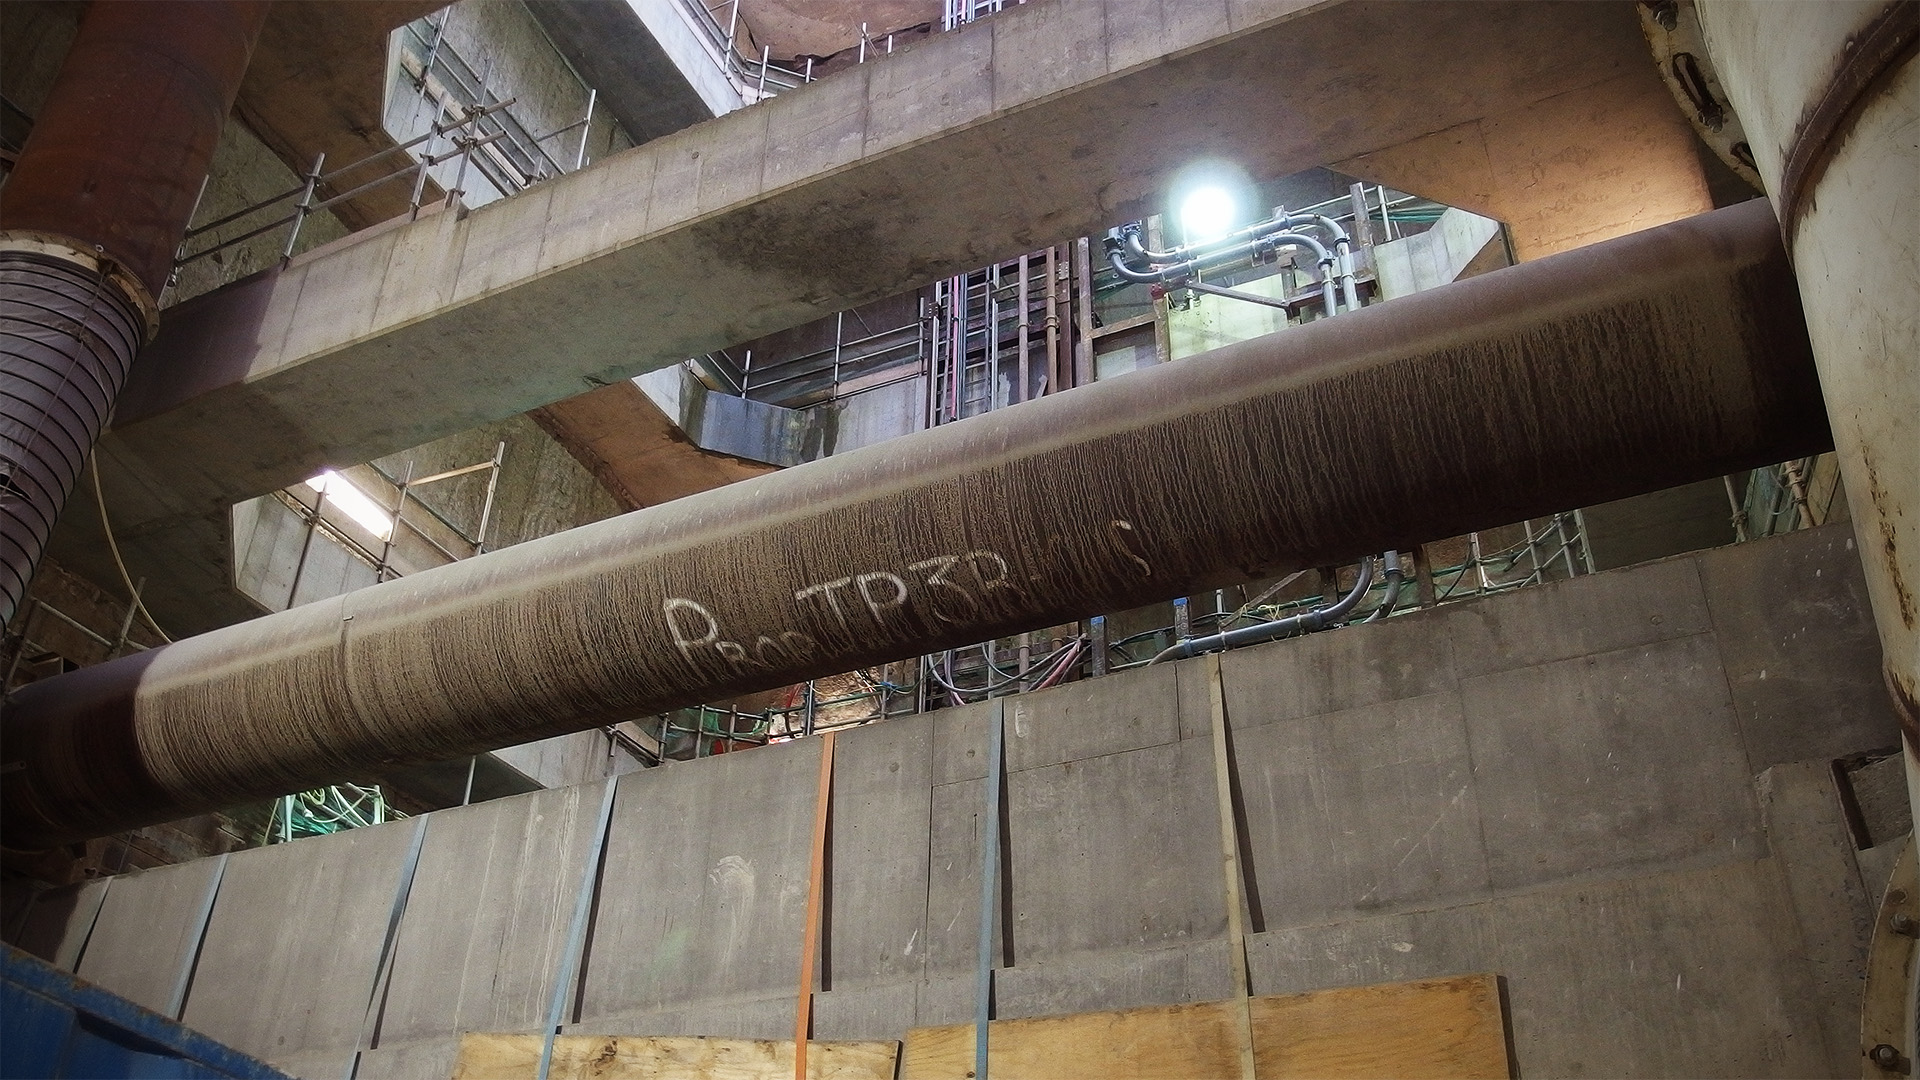 A massive steel prop supporting the walls of a deep shaft